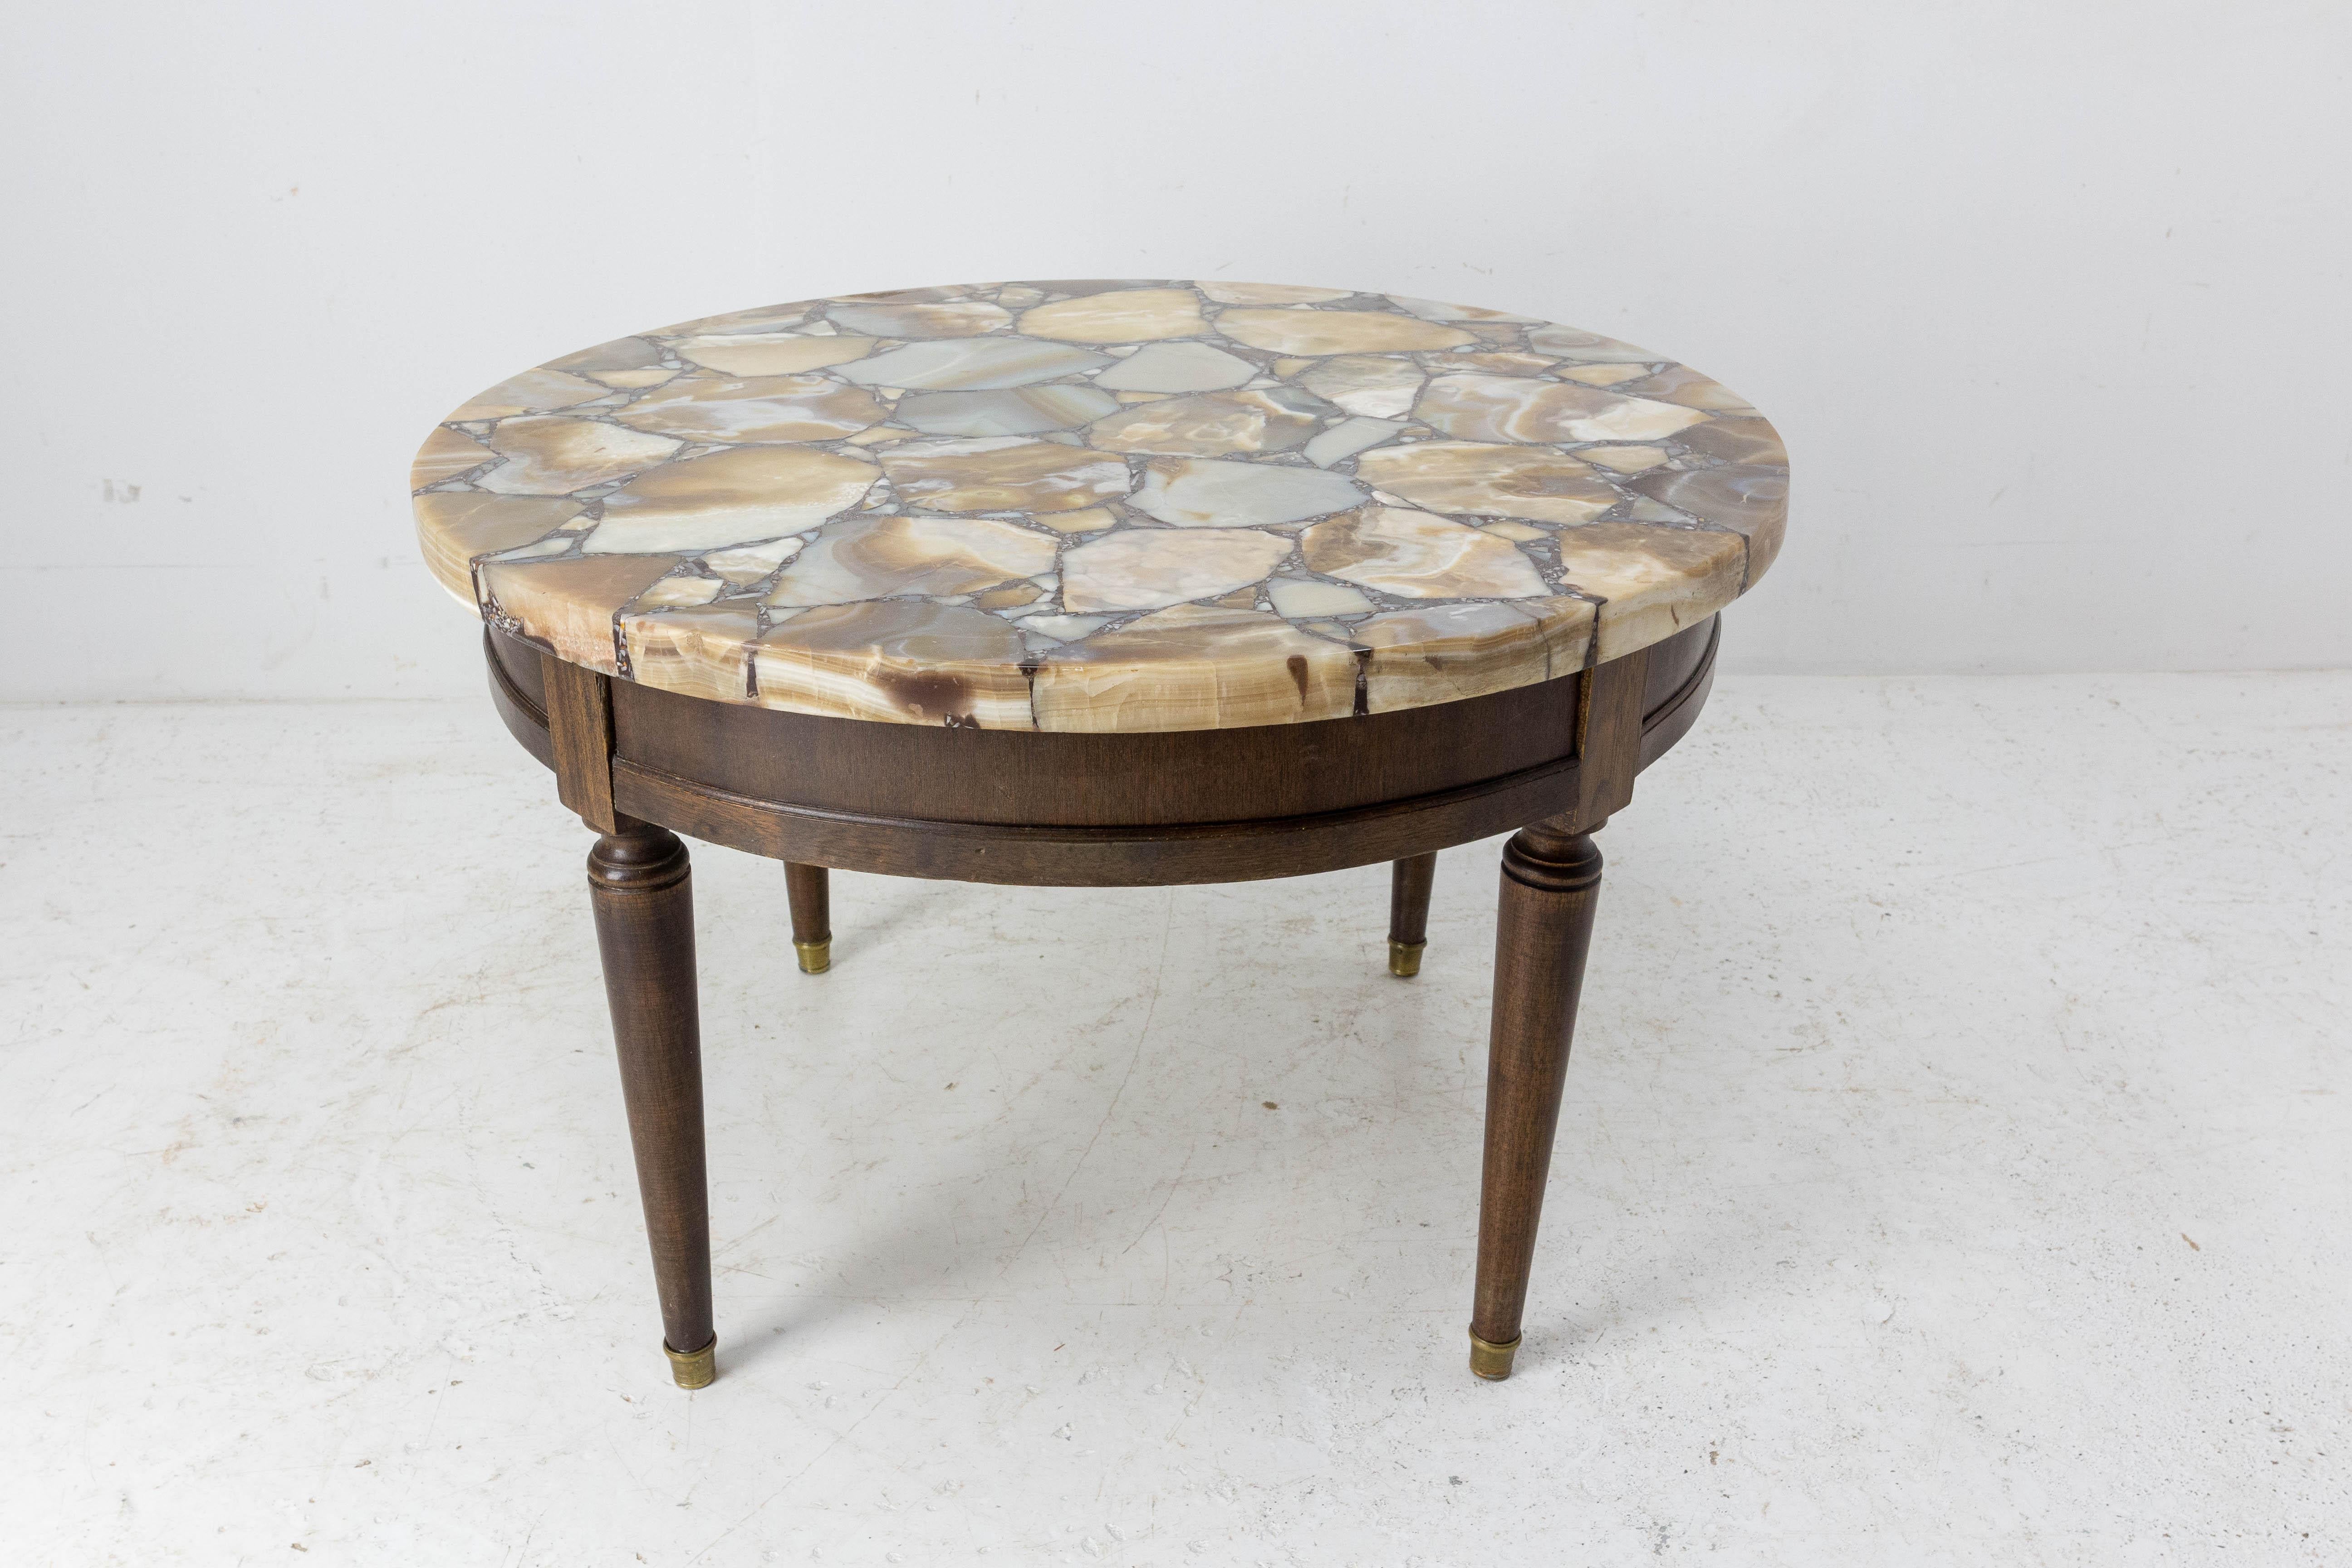 Mid-century onyx coffee table, made in France with african onyx (Madagascar) and wood
Made circa 1960 in the Louis XVI style
Can also be used as side table or end table
Good condition.

Shipping:
D70 H45 33 Kg